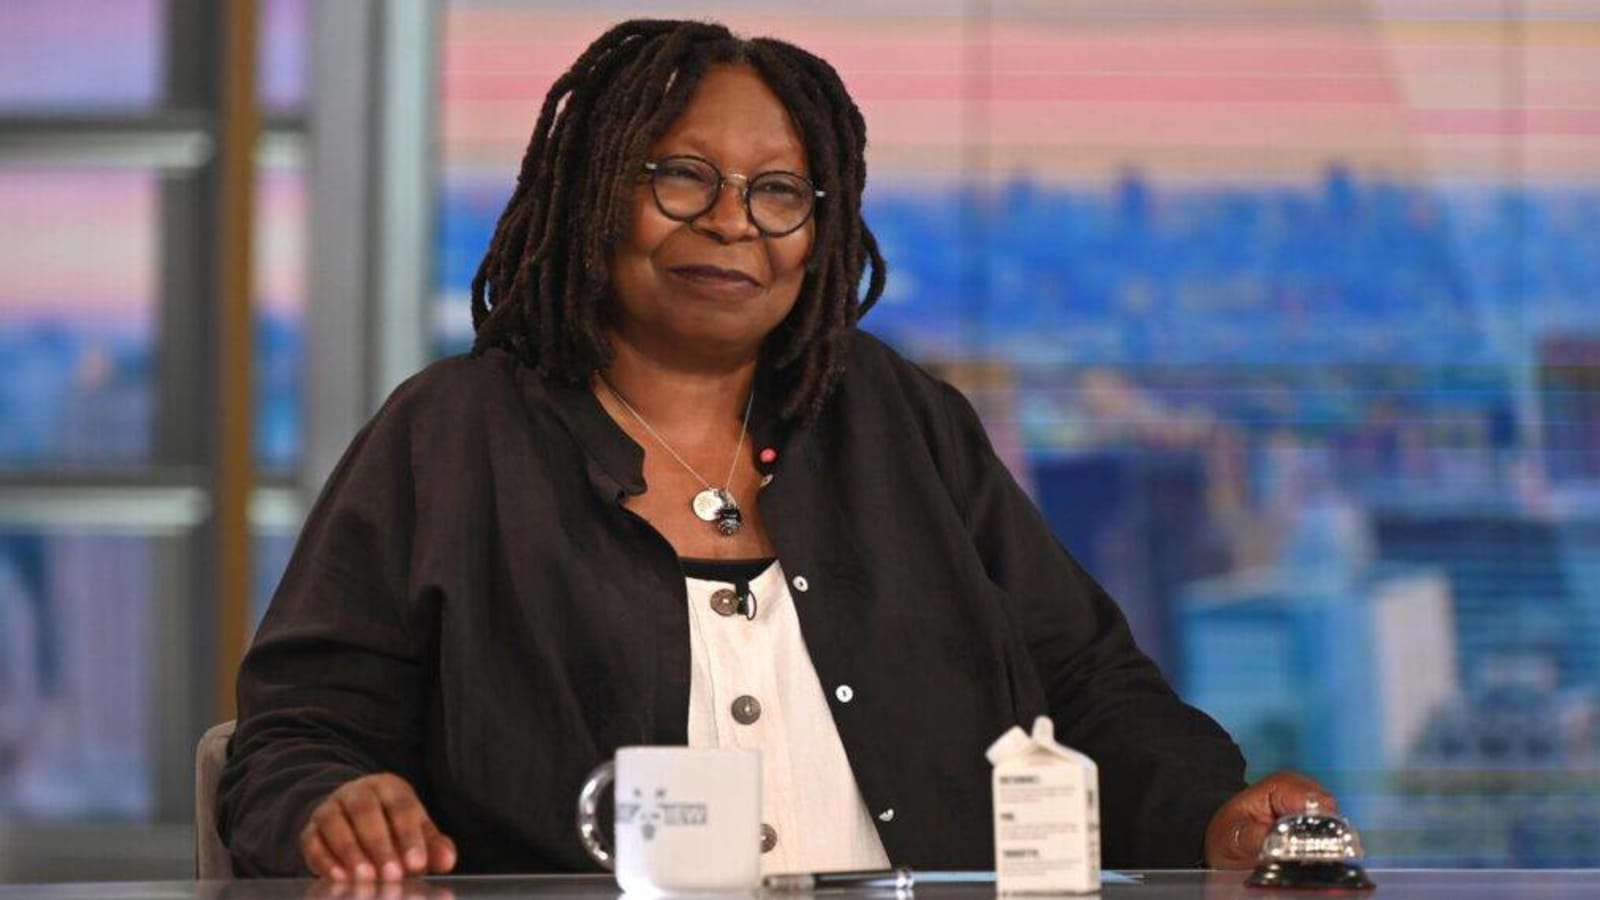 ‘The View’: Whoopi Goldberg Blasts Trump for ‘Whining’ as Stormy Daniels Testifies at Trial